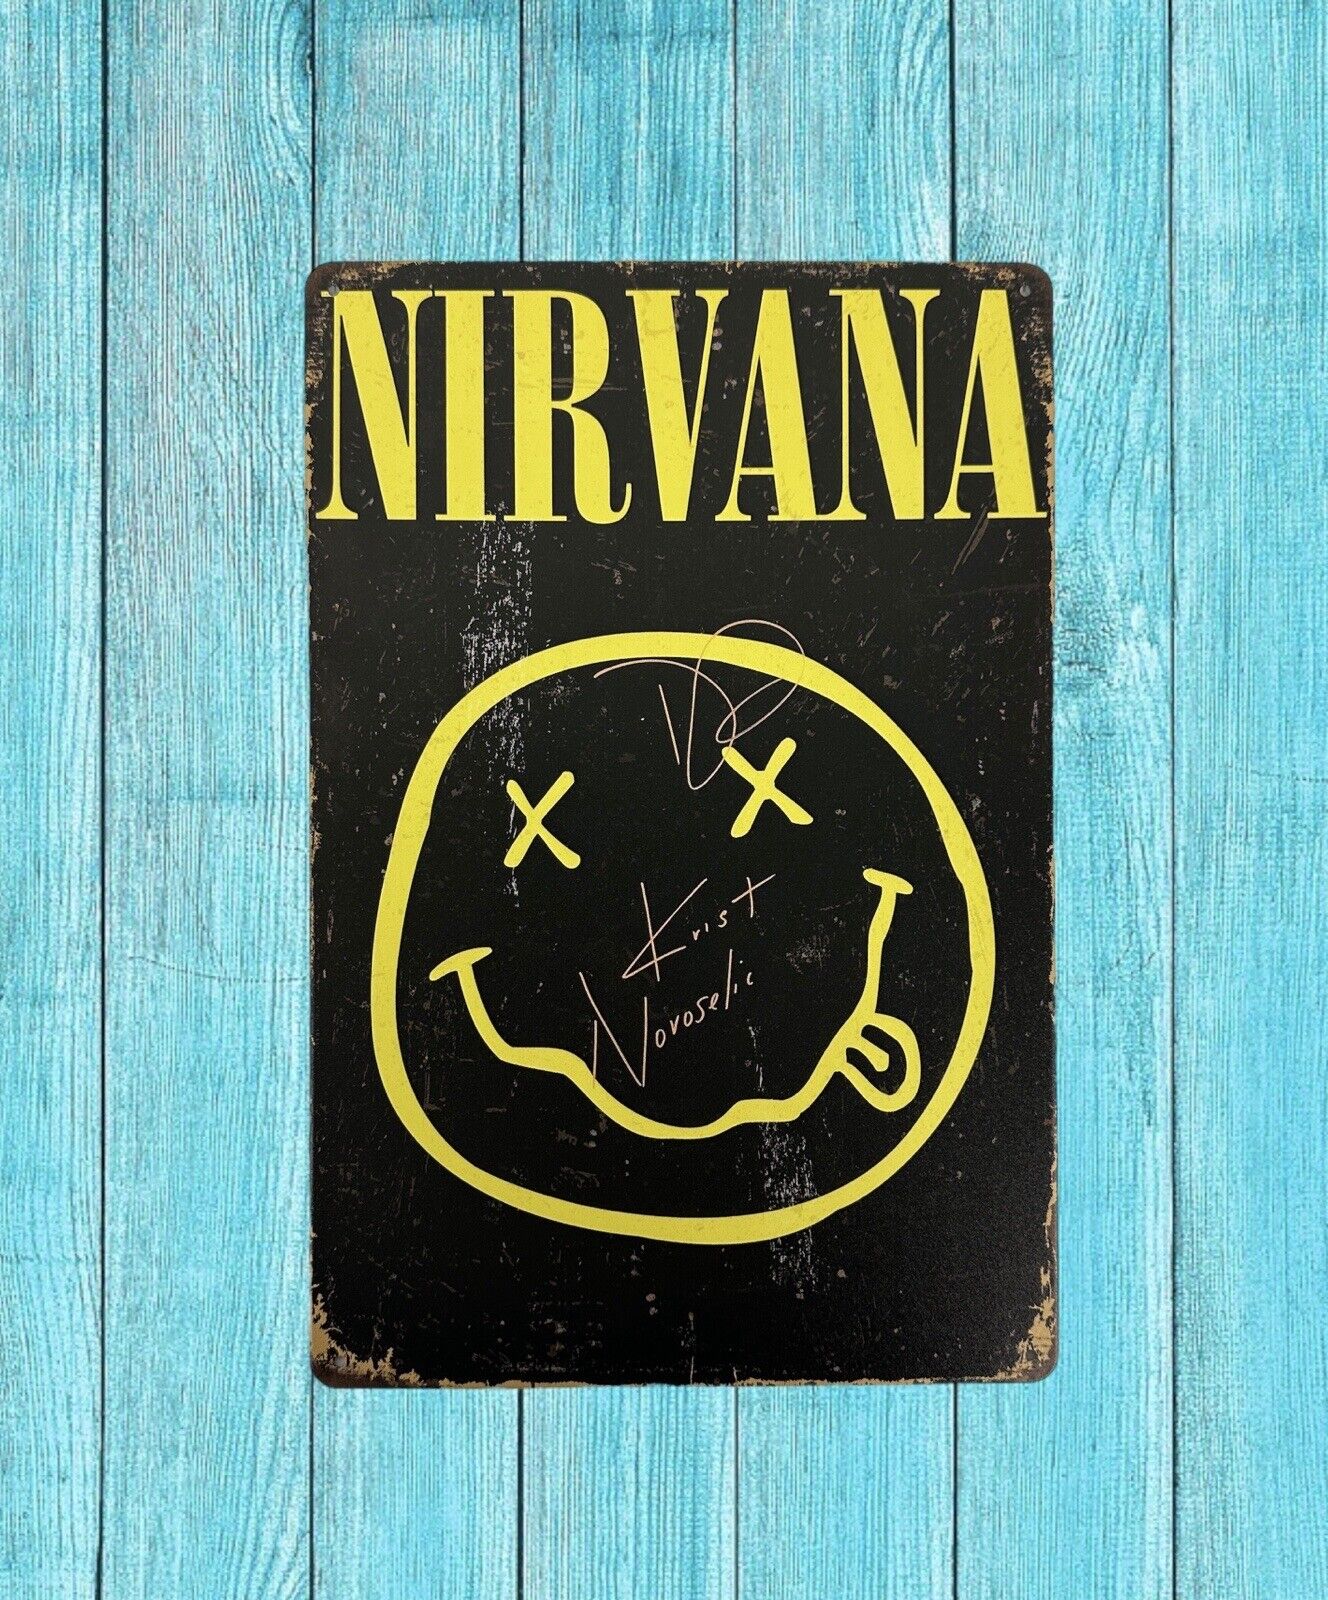 Nirvana Vintage Style Tin Metal Bar Sign Poster Man Cave Collectible New